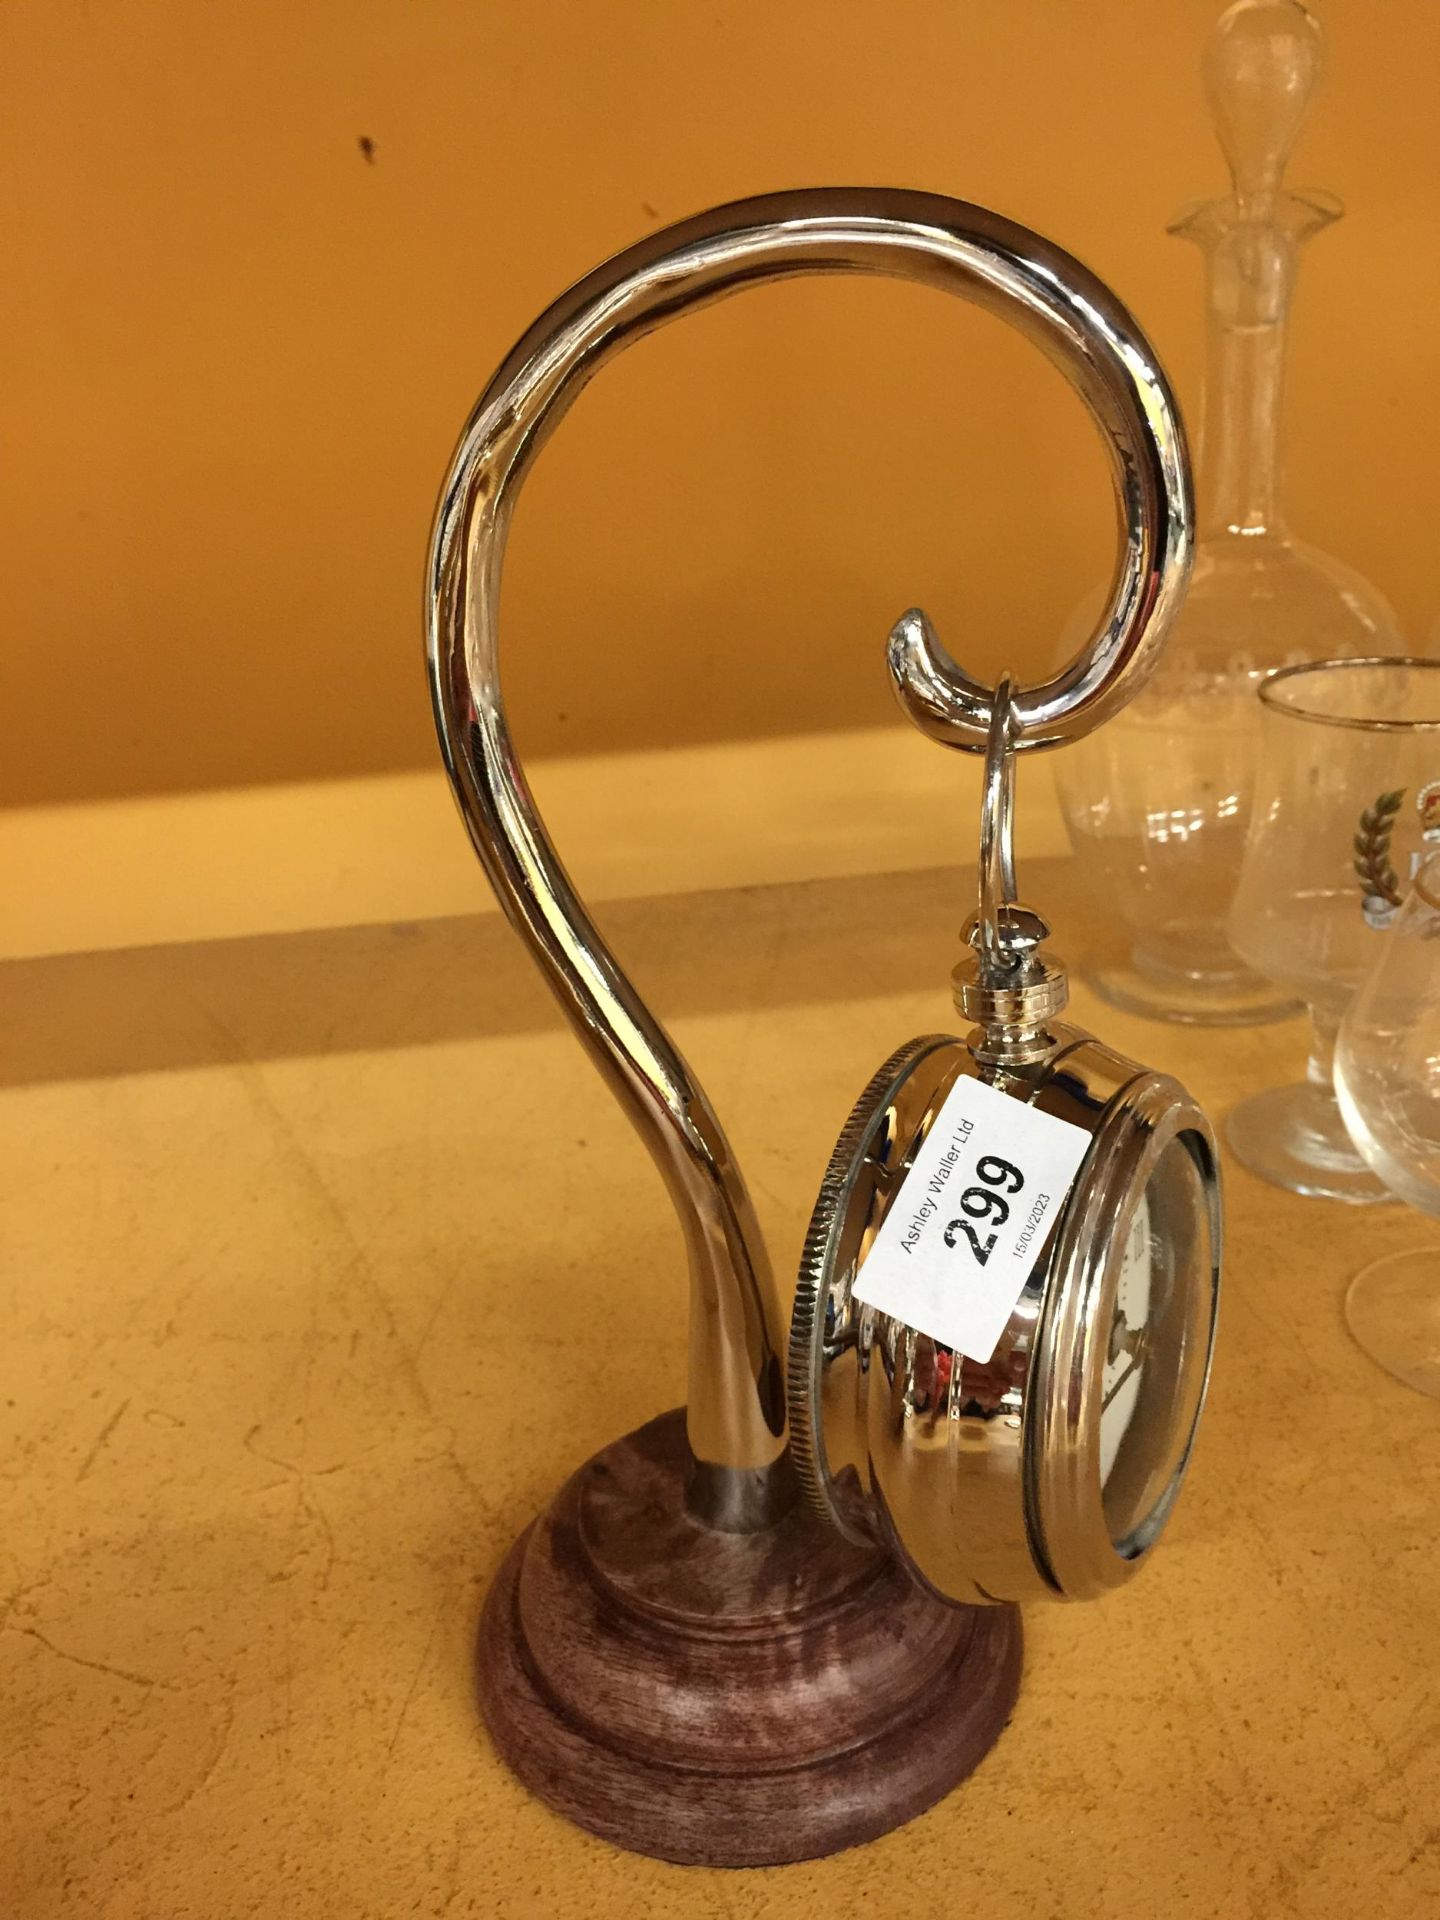 A CHROME POCKET WATCH STYLE CLOCK ON A CHROME STAND WITH WOODEN BASE - Image 2 of 3